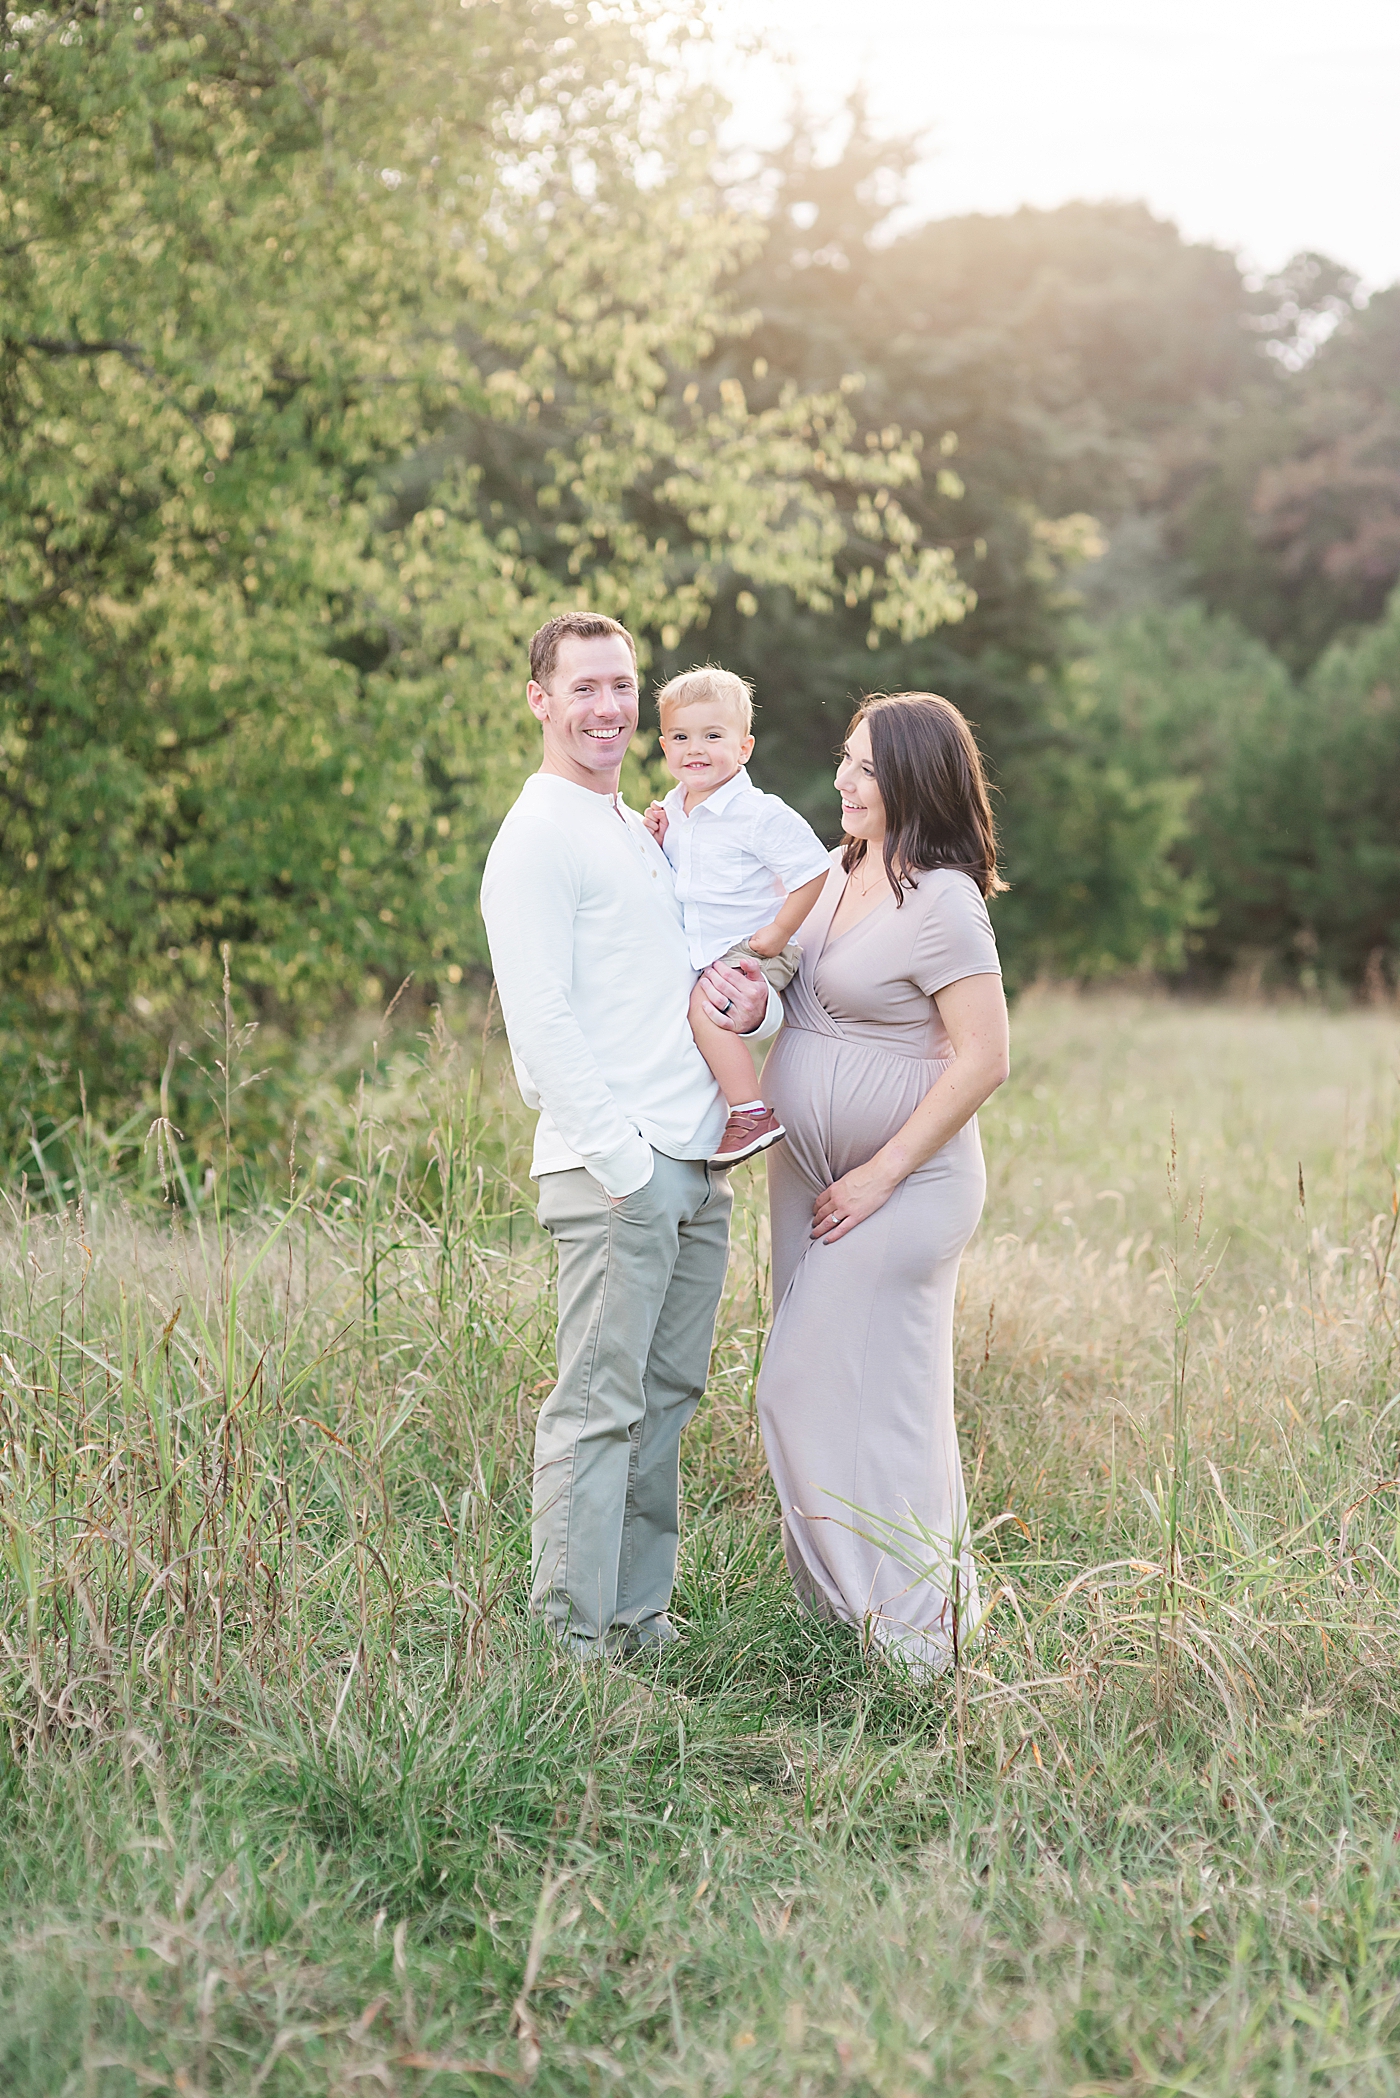 Mom dad and toddler smiling | Photo by Davidson Maternity Photographer Anna Wisjo